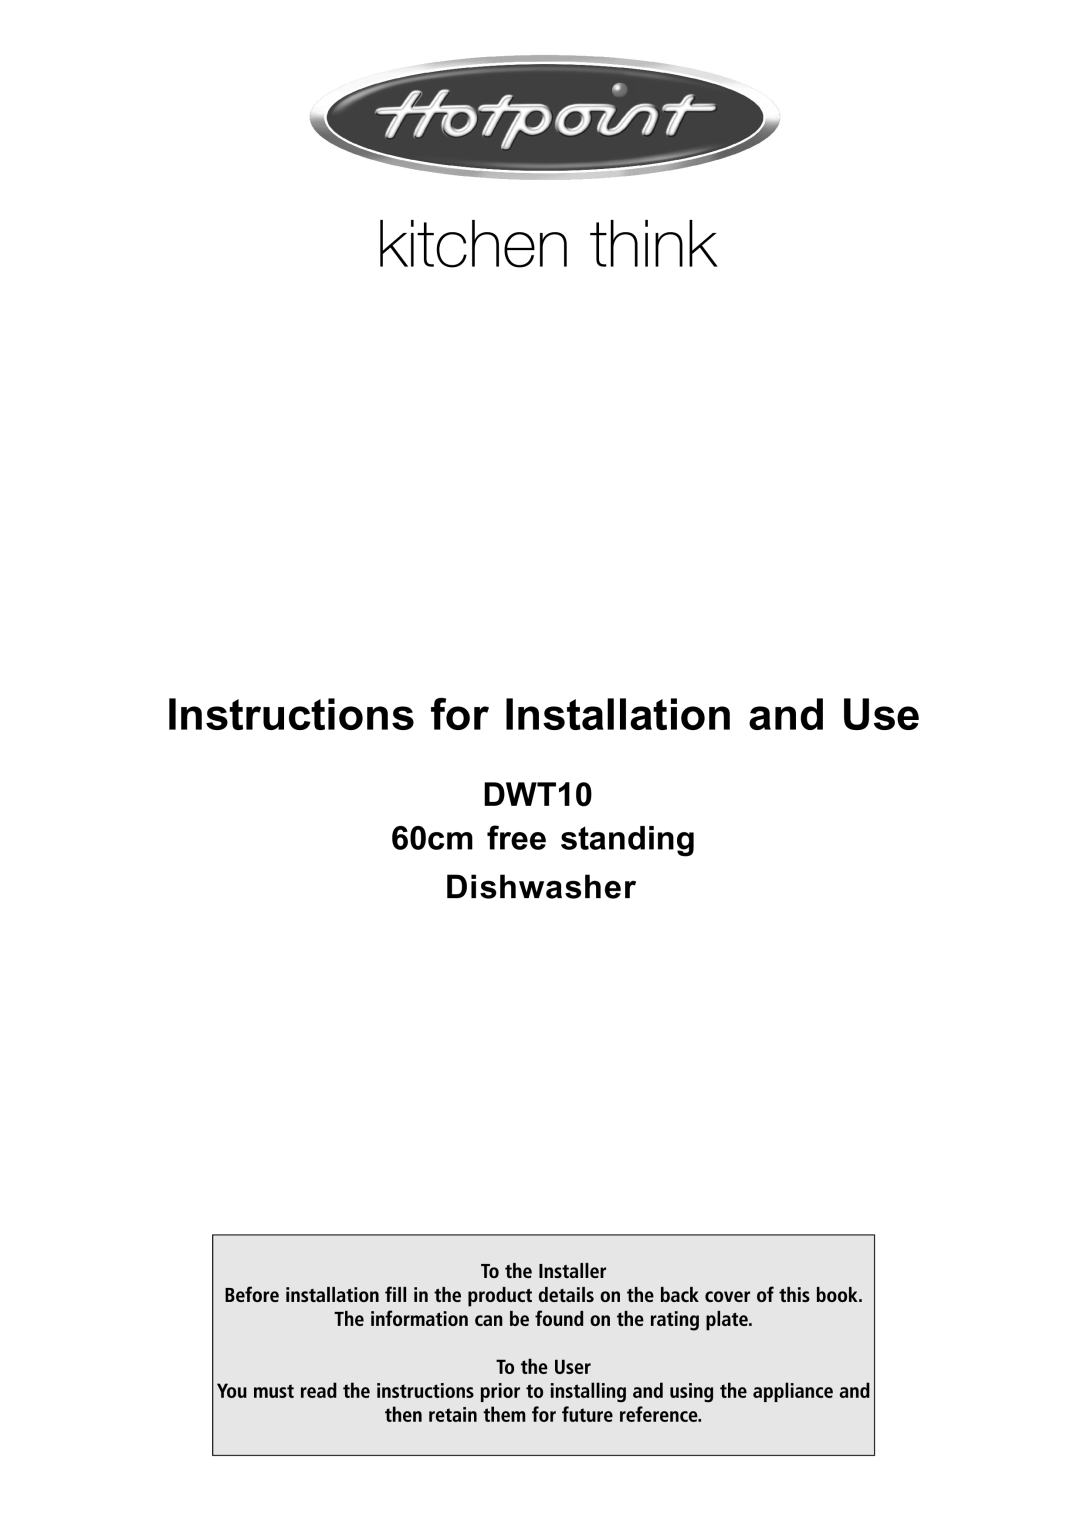 Hotpoint manual Instructions for Installation and Use, DWT10 60cm free standing Dishwasher 